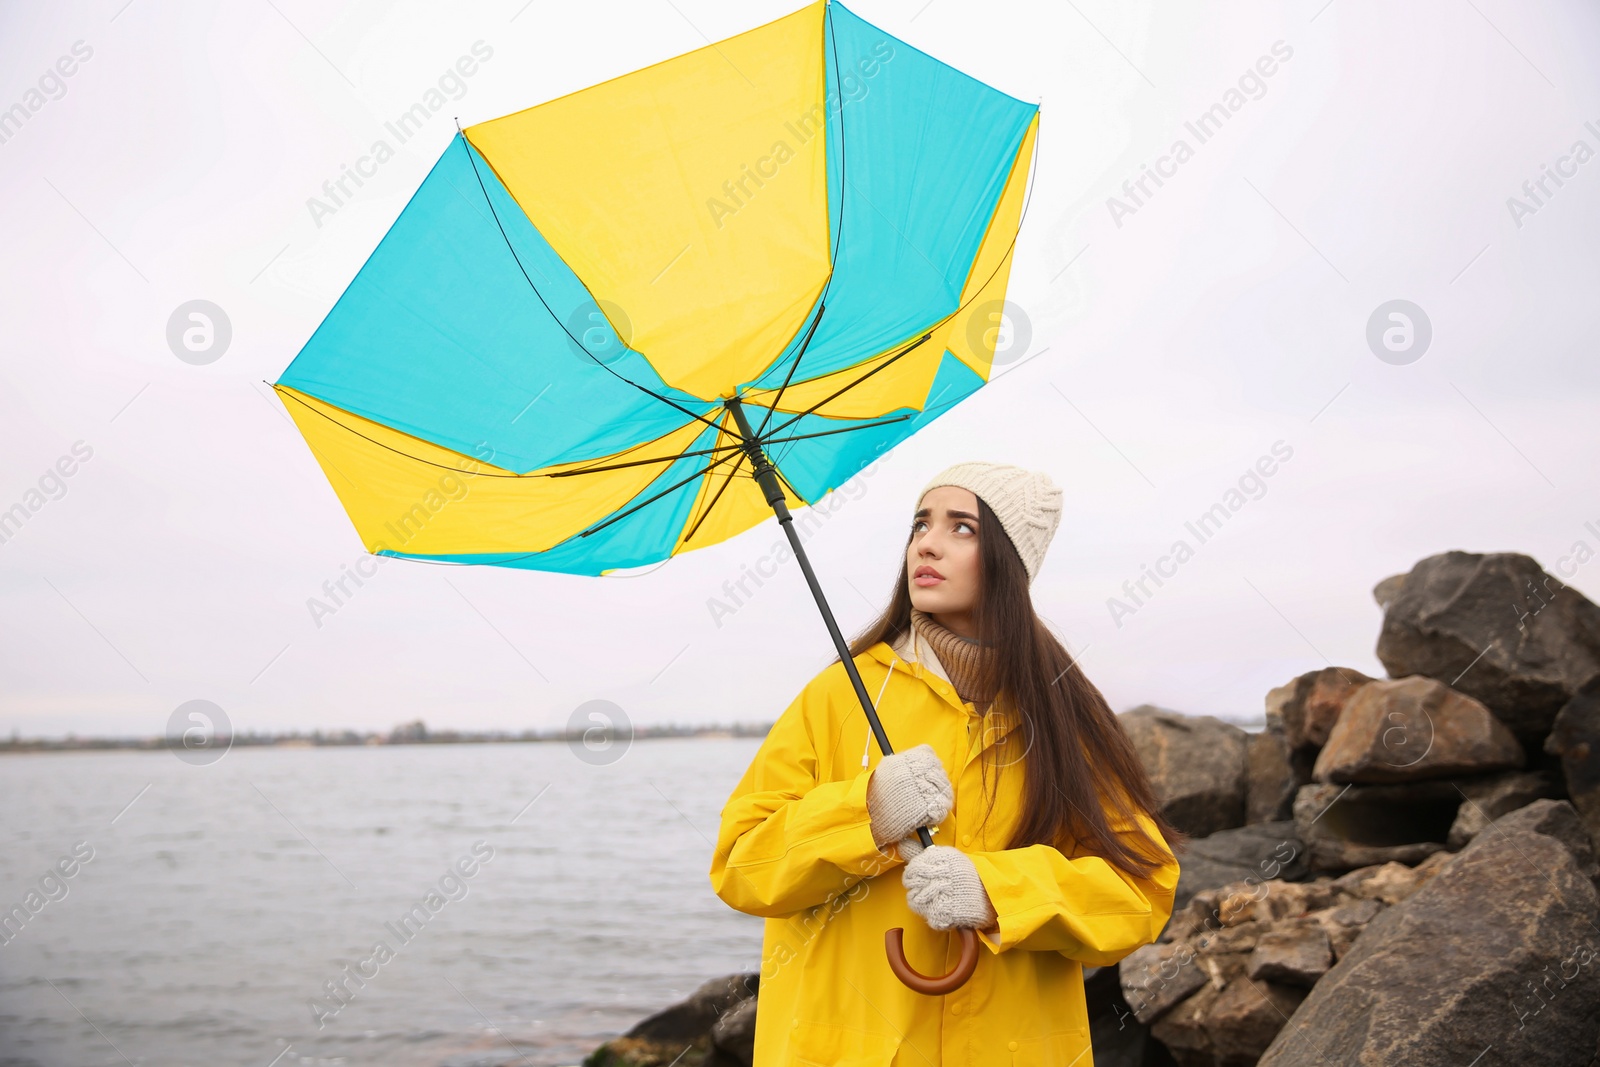 Photo of Woman in yellow raincoat with umbrella caught in gust of wind near river